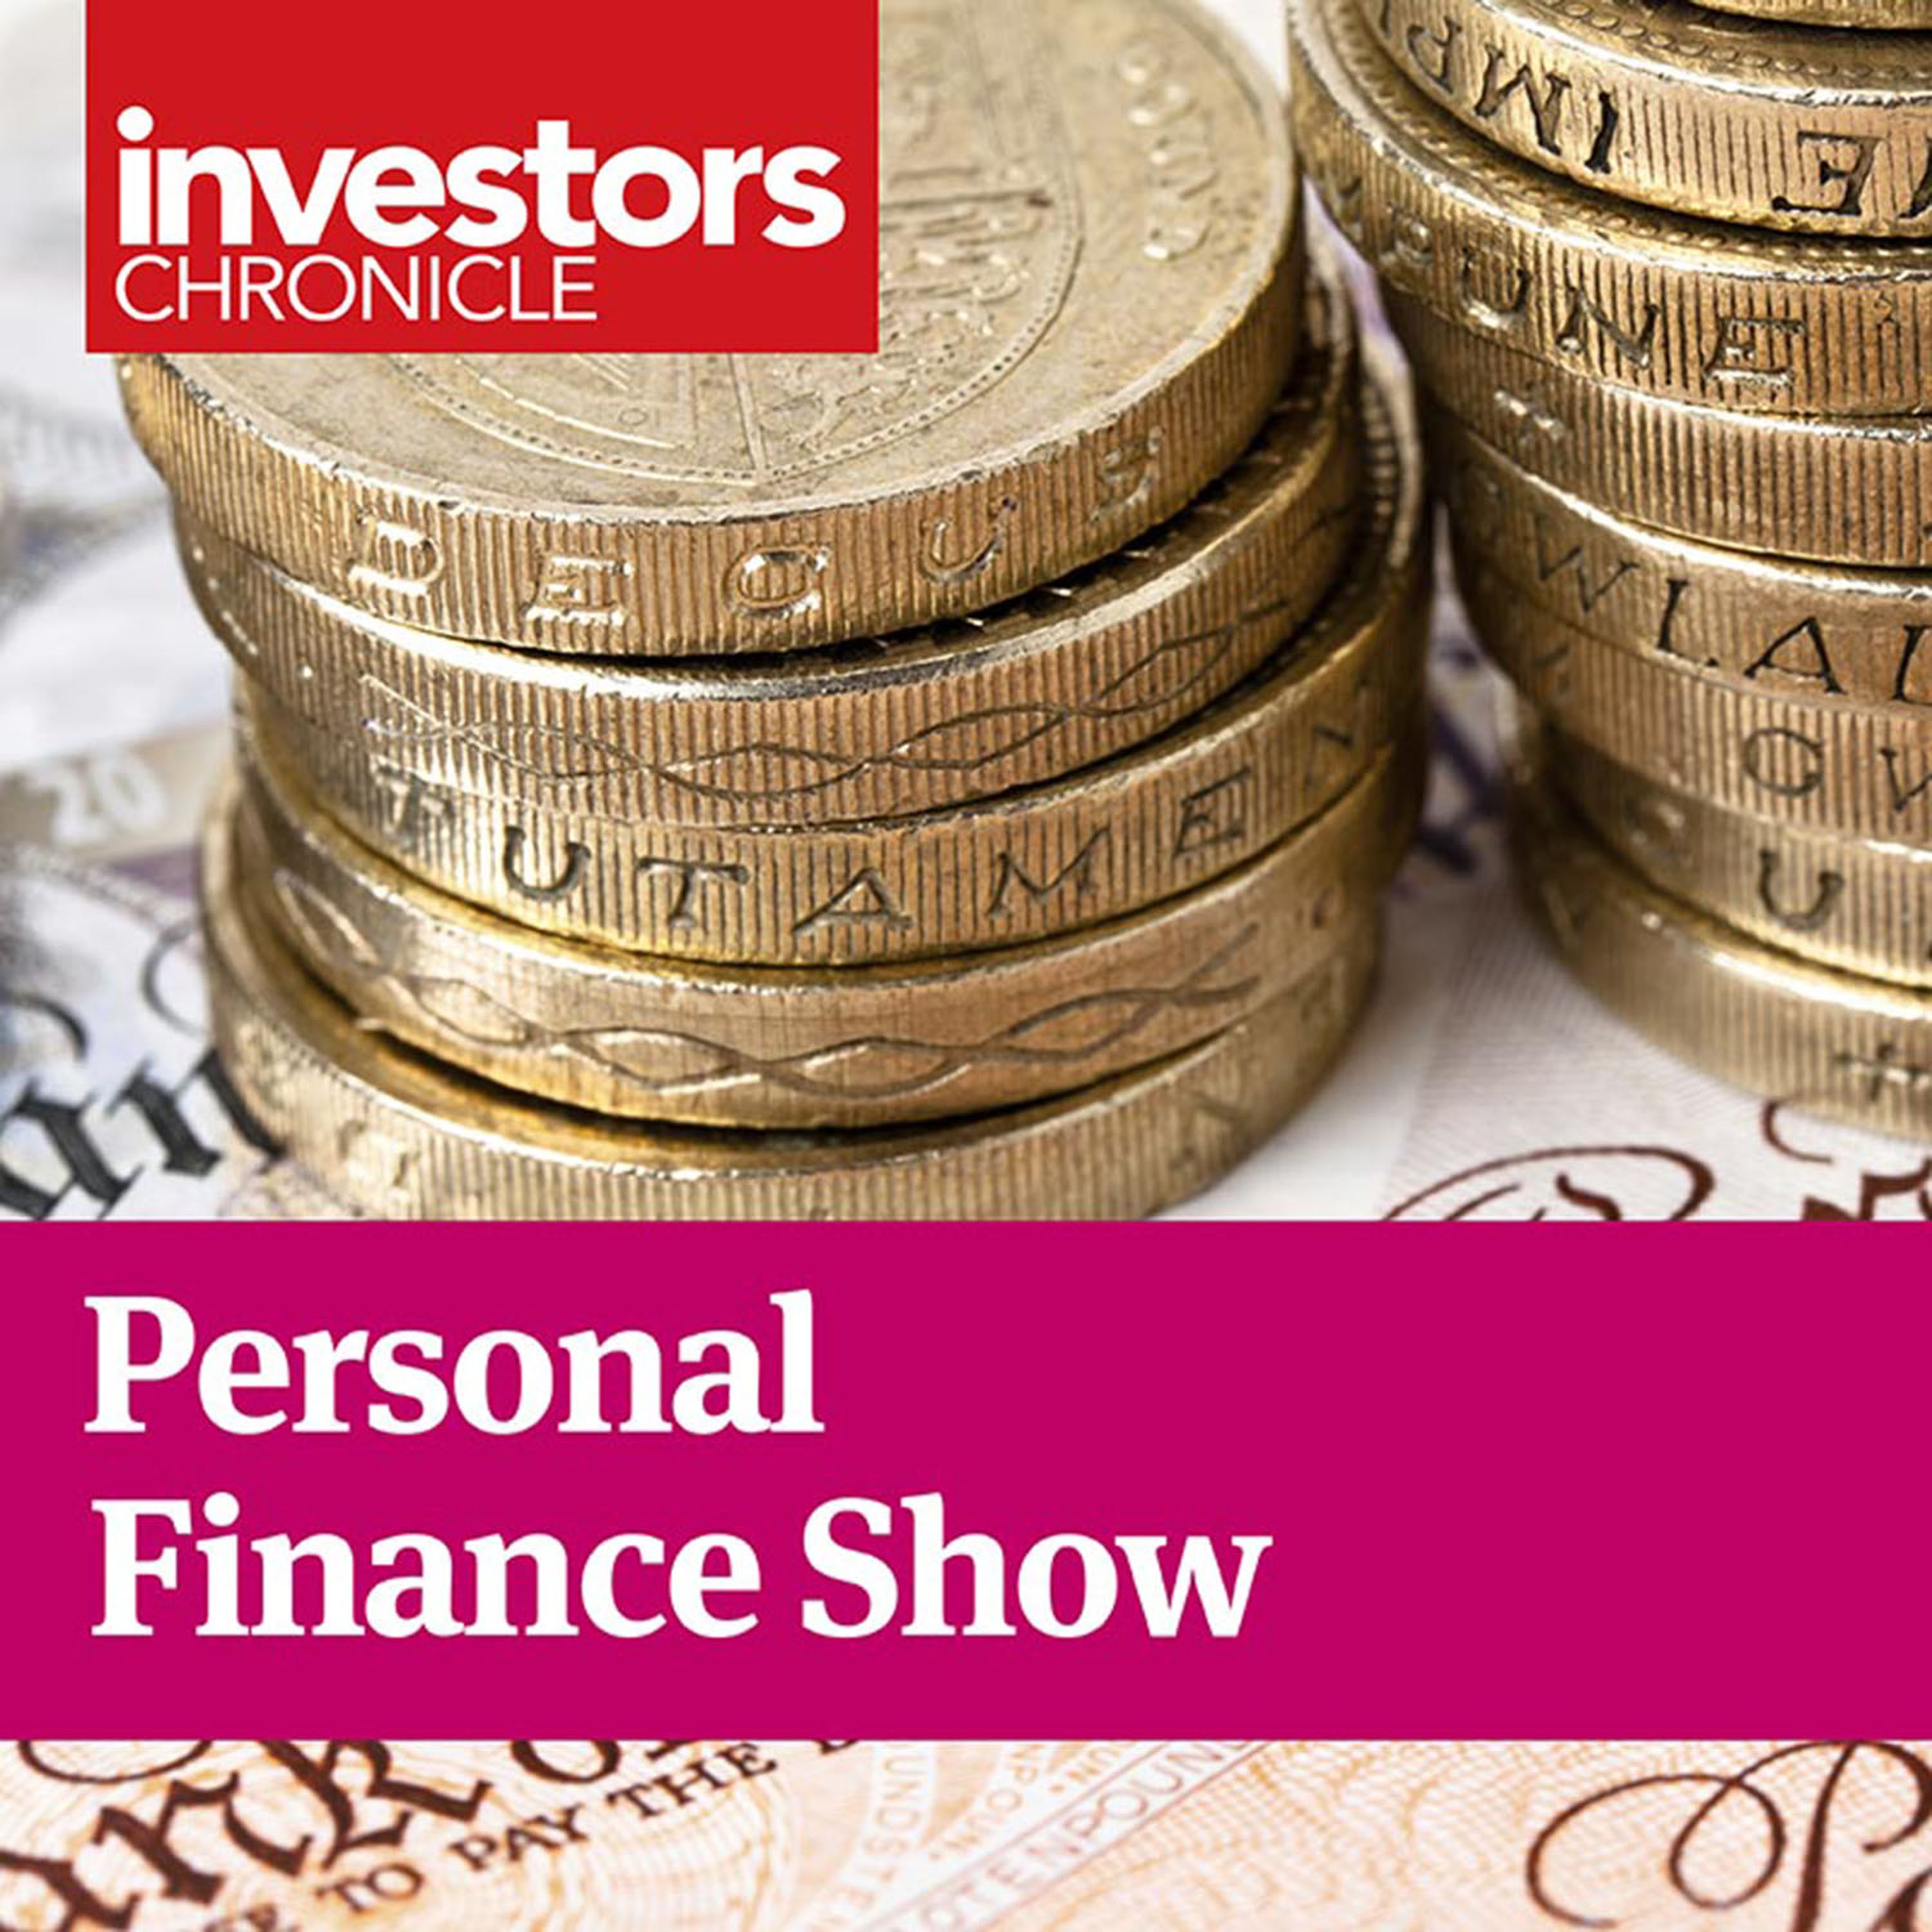 Personal Finance Show: Financial rebound and equity income champions